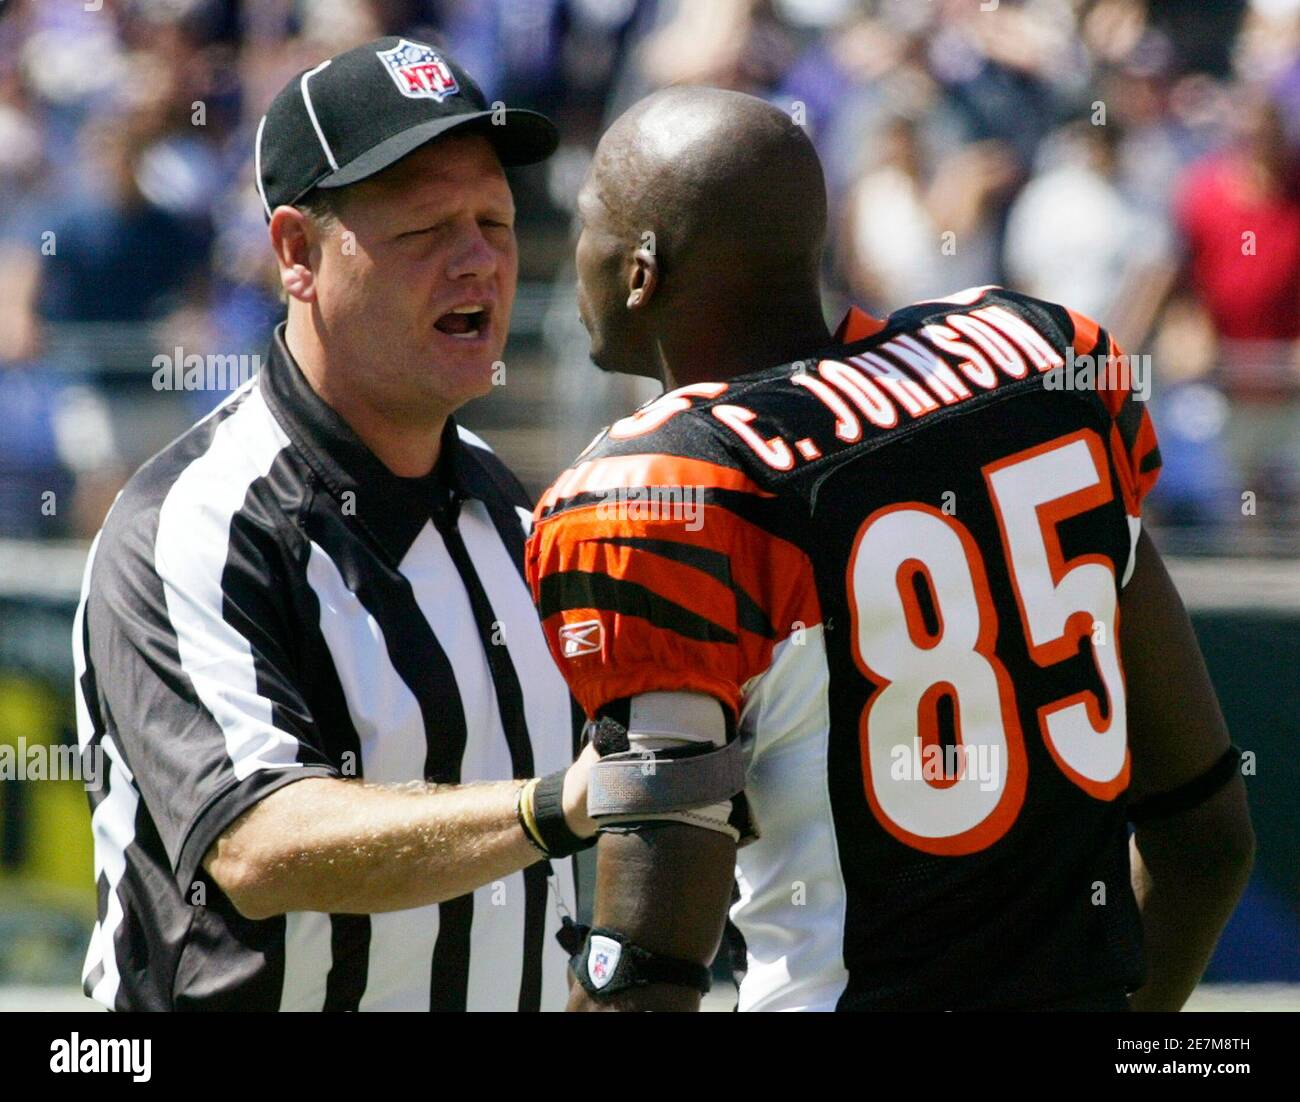 Cincinnati Bengals wide receiver Chad Johnson is kept back by head linesman  Jerry Bergman at the start of the Bengals' NFL football game against the  Baltimore Ravens in Baltimore, Maryland September 7,